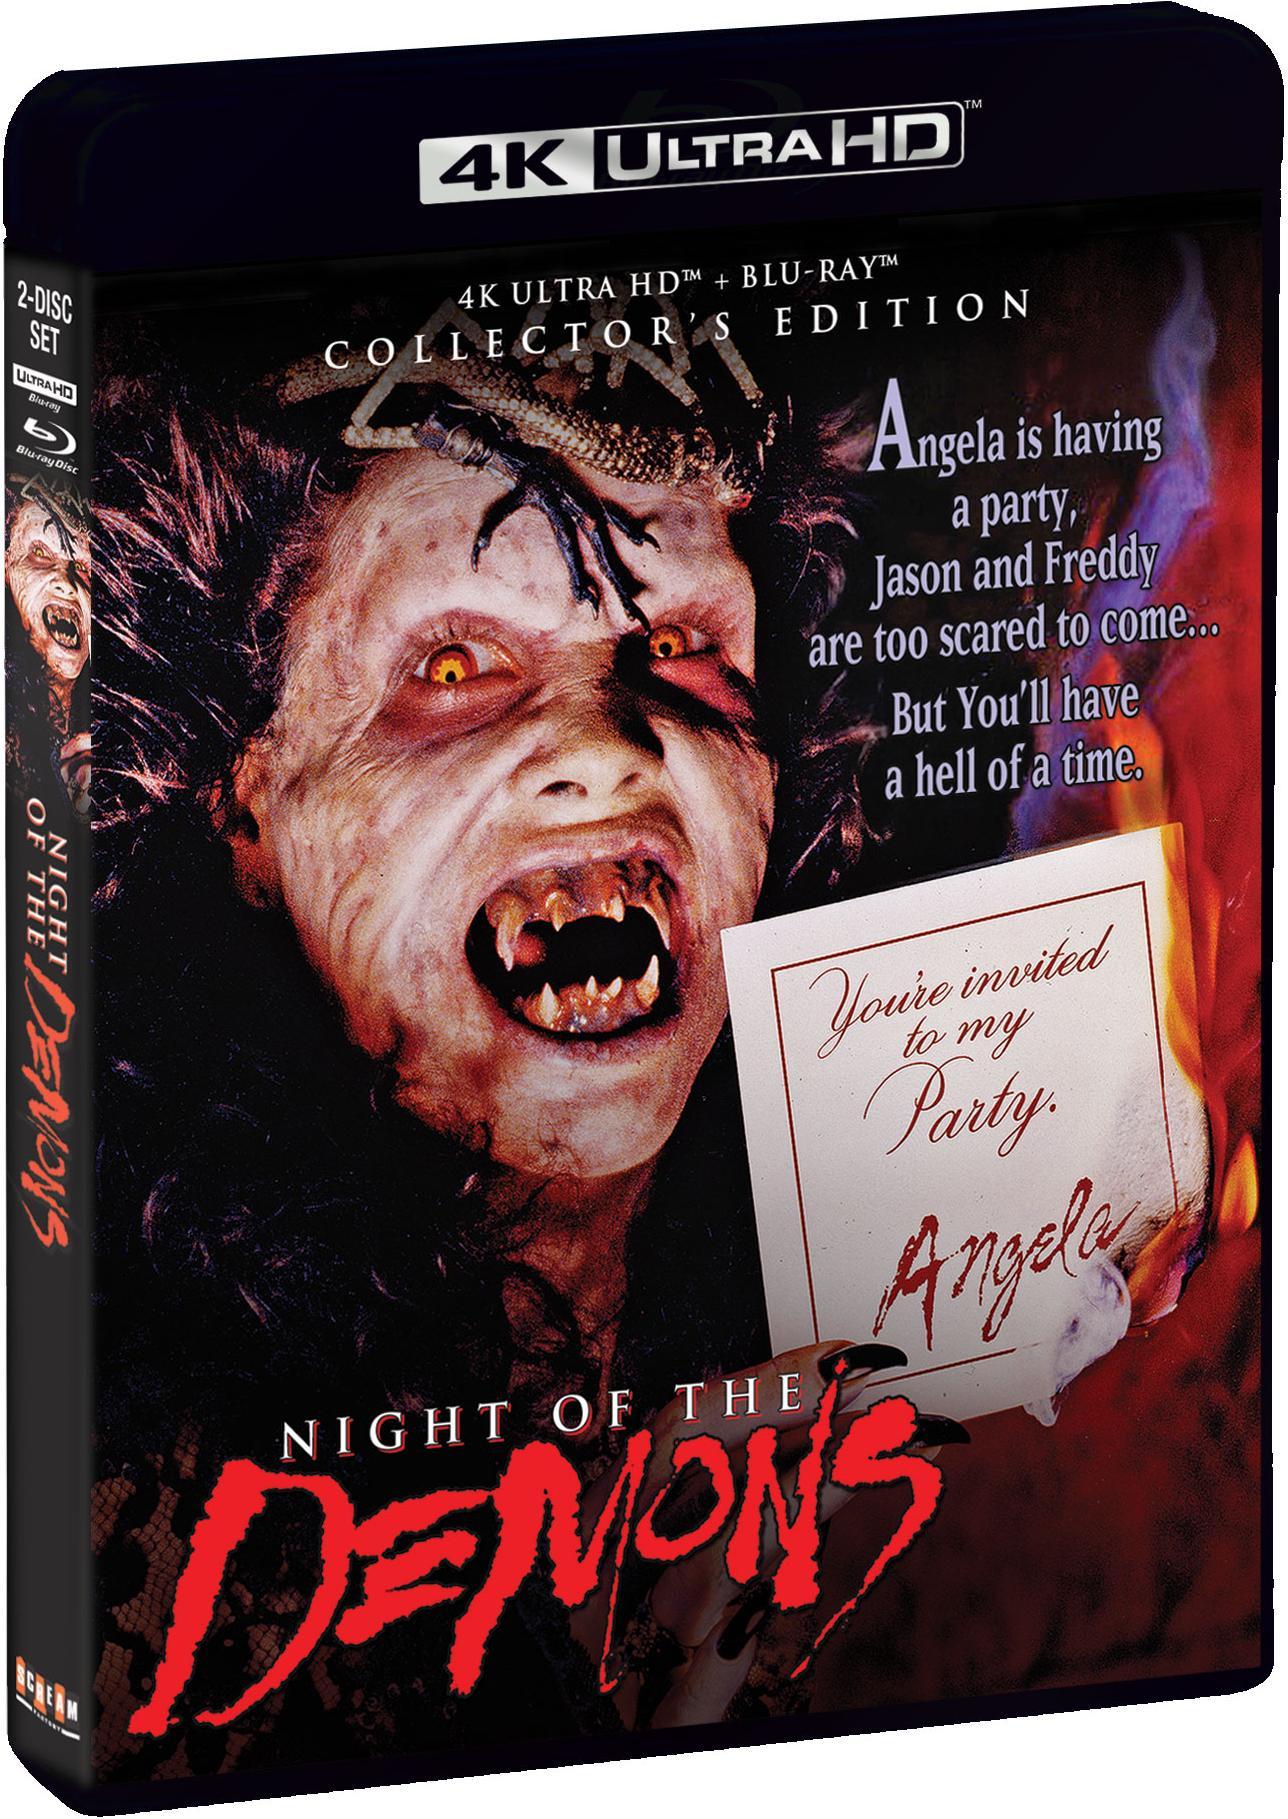 Night of the Demons (1988) (Collector's Edition) (4K Ultra HD + Blu-ray) - image 2 of 3